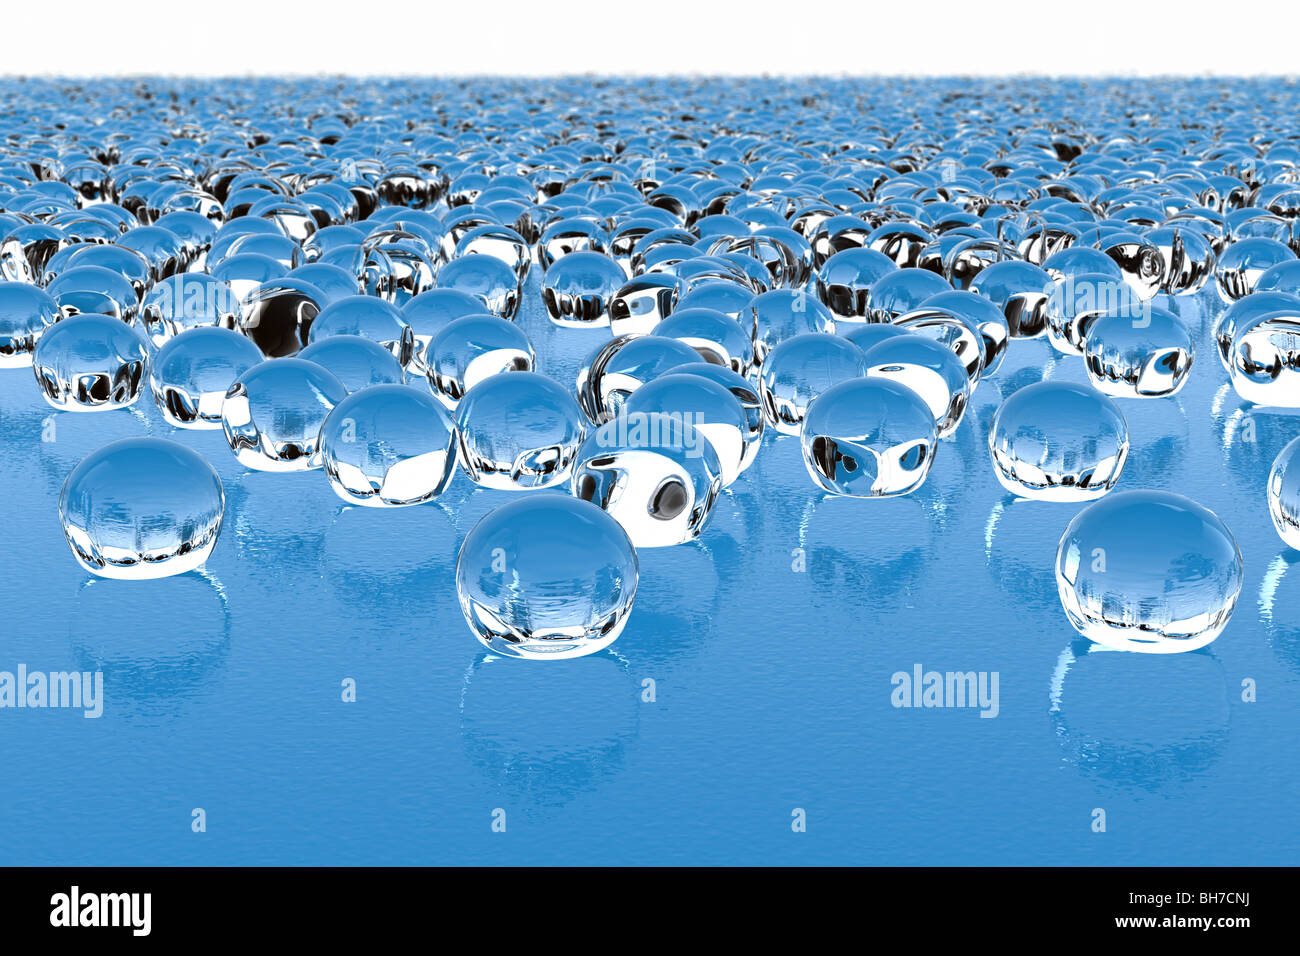 Thousands of glass drops on a wavy glass surface with reflections, refractions and a medium depth of field. Stock Photo